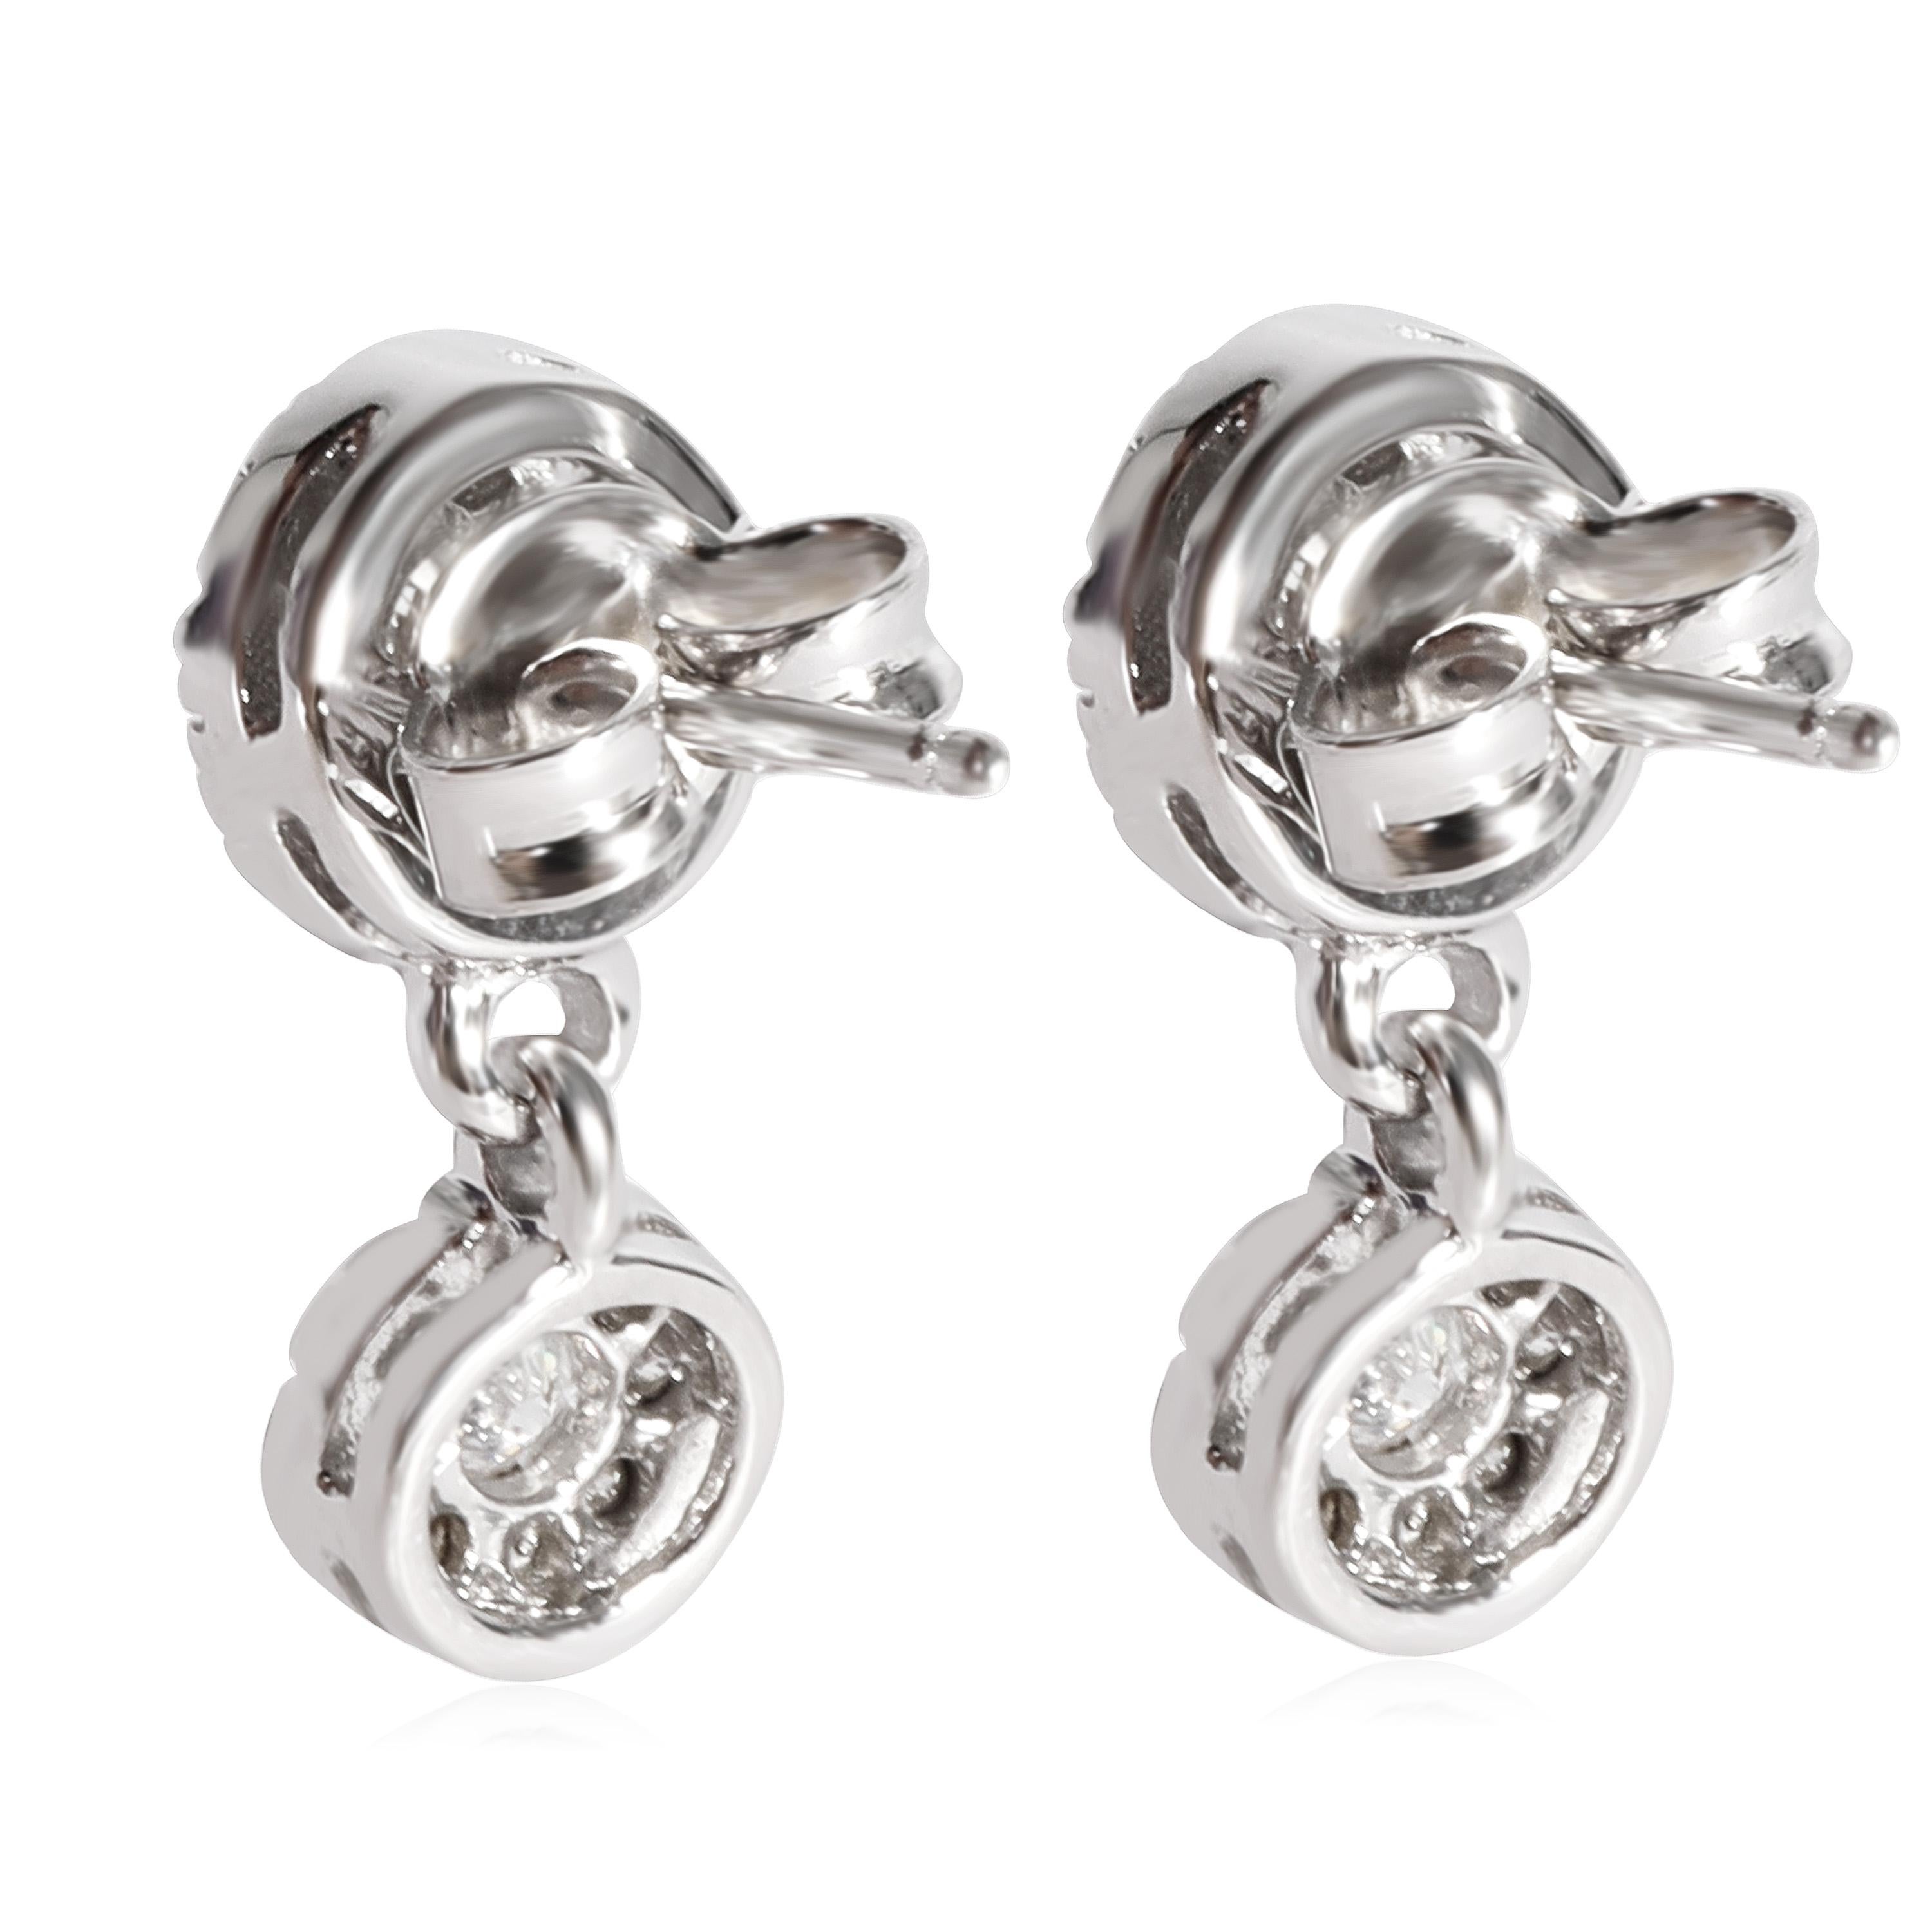 Diamond Cluster Drop Earrings in 14k White Gold 1/1 Ctw

PRIMARY DETAILS
SKU: 117760
Listing Title: Diamond Cluster Drop Earrings in 14k White Gold 1/1 Ctw
Condition Description: Retails for 1595 USD. In excellent condition and recently